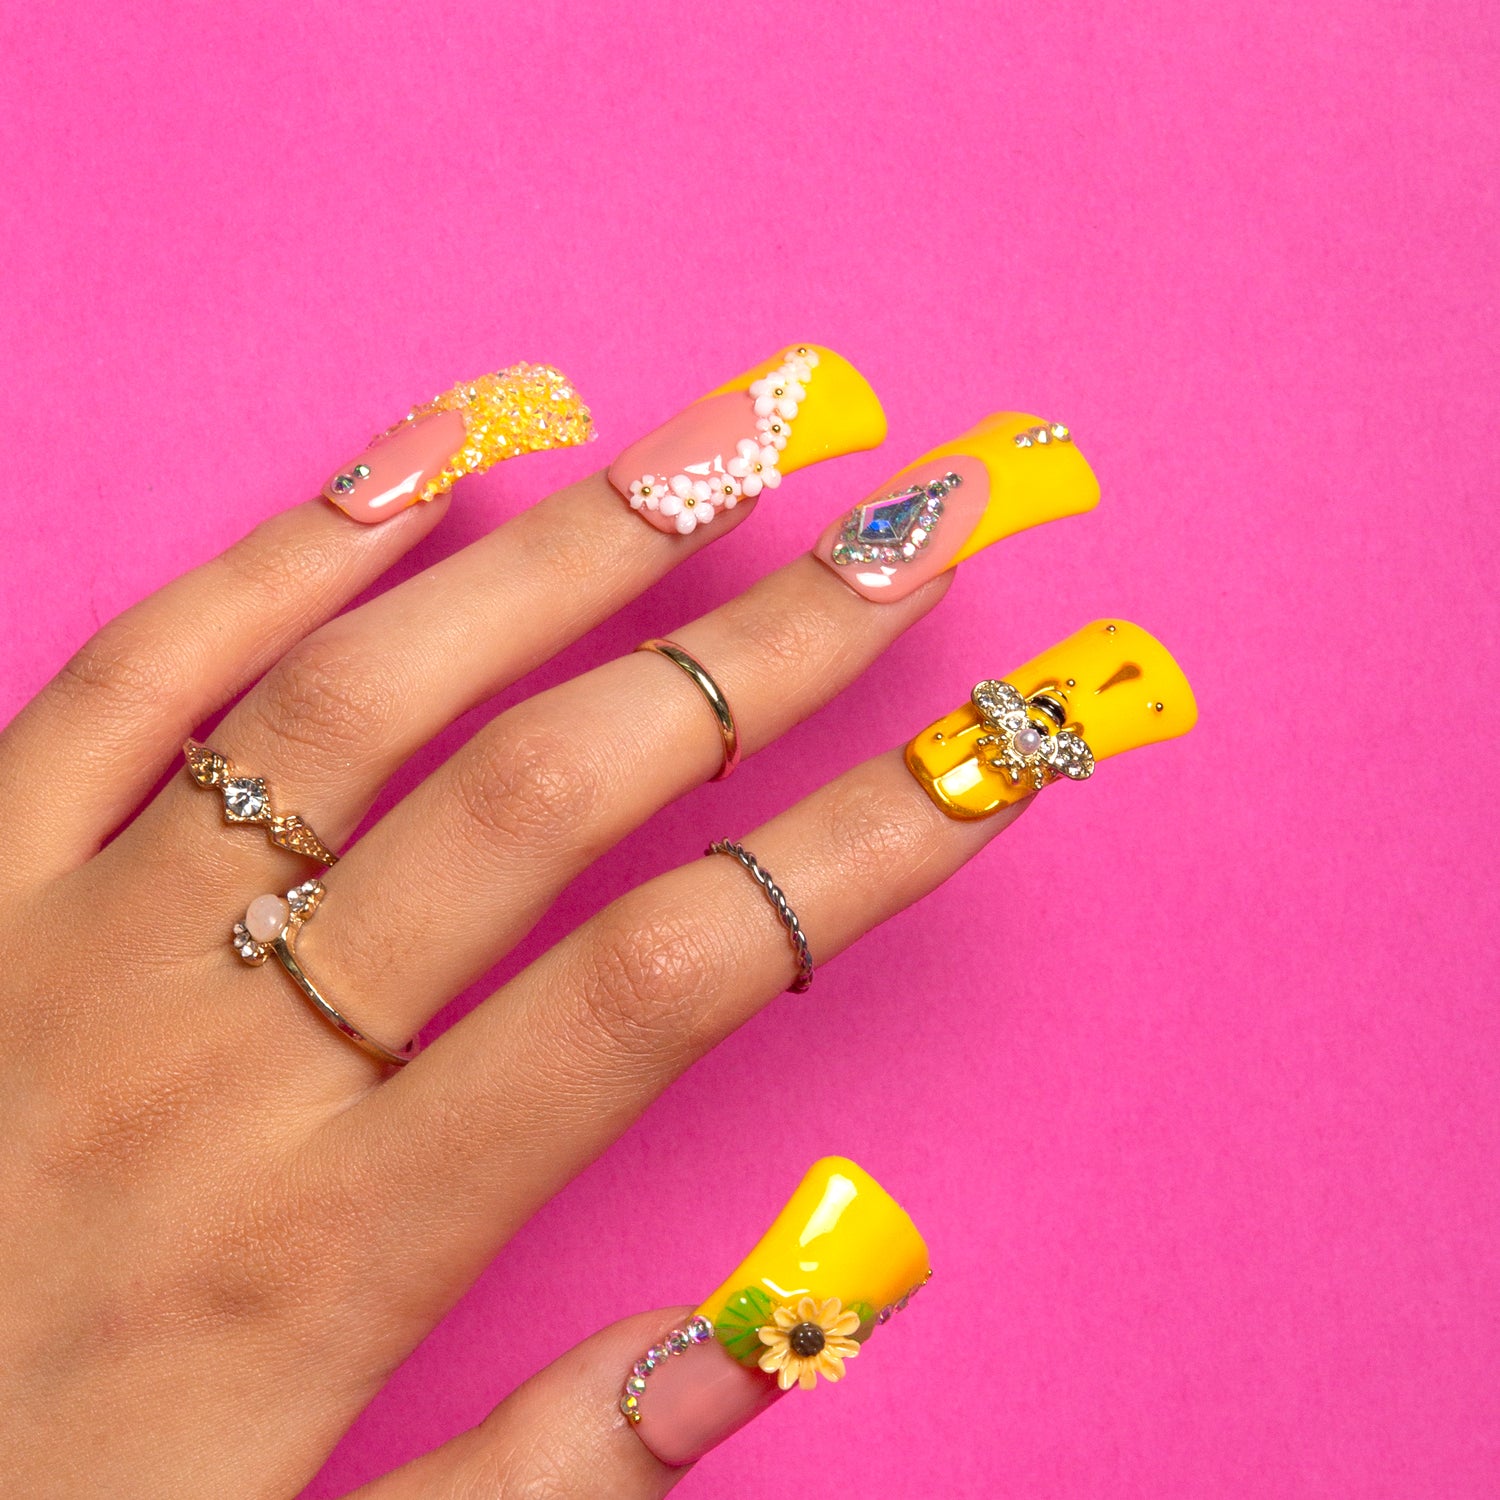 Hand with bright yellow press-on acrylic nails featuring sunflower patterns, bee accents, pearls, rhinestones, and intricate designs, complemented by multiple silver rings.